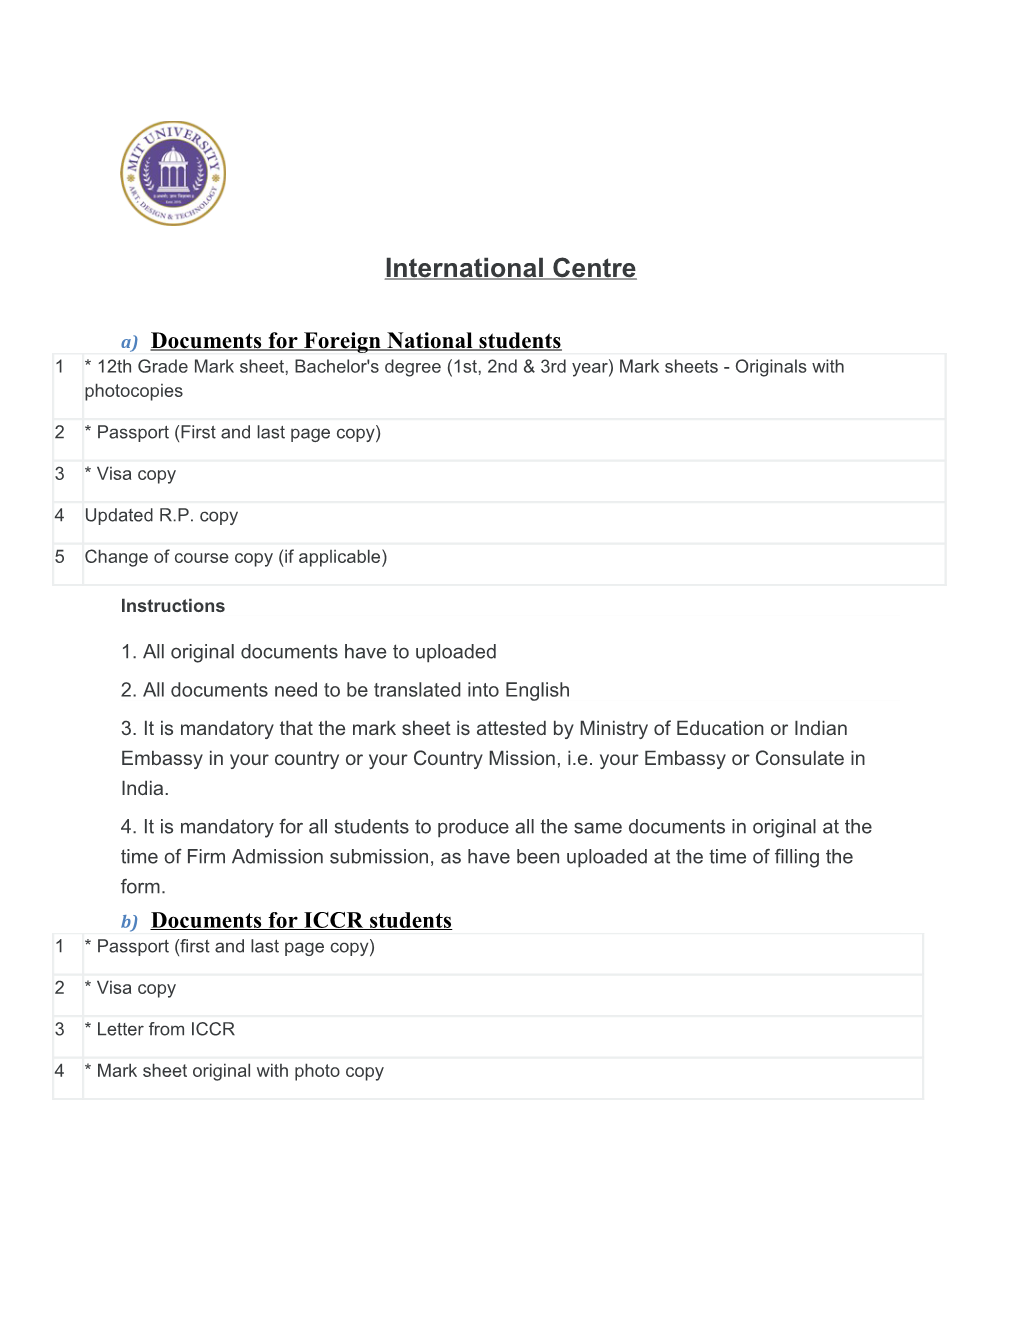 A)Documents for Foreign National Students